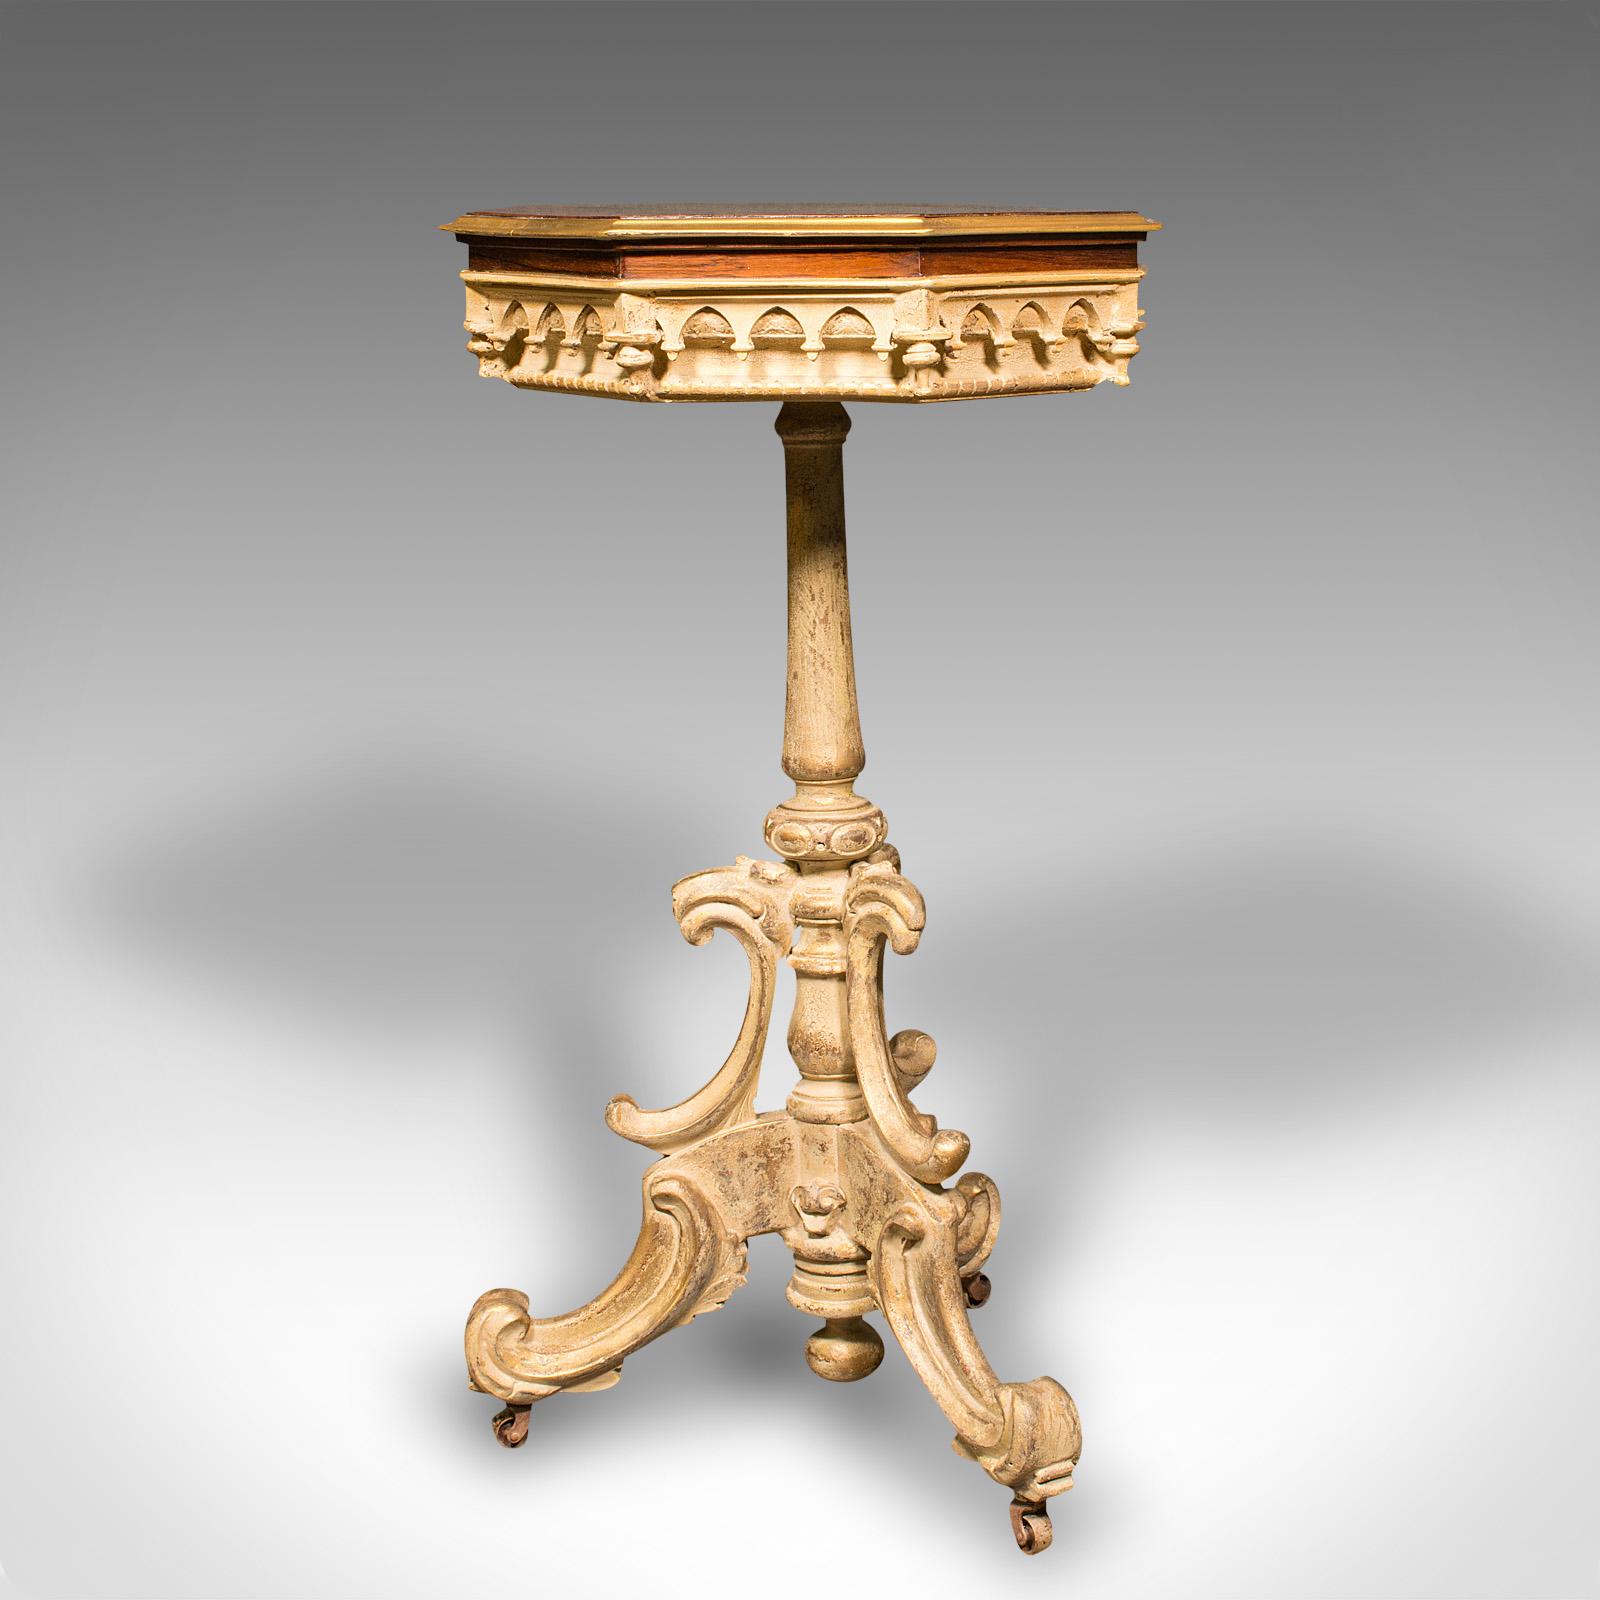 This is an antique decorative side table. A Continental, flip top wine or lamp stand in Regency revival taste, dating to the Victorian period and later, circa 1900.

Classical European elegance, with flourishes throughout
Displays a desirable aged